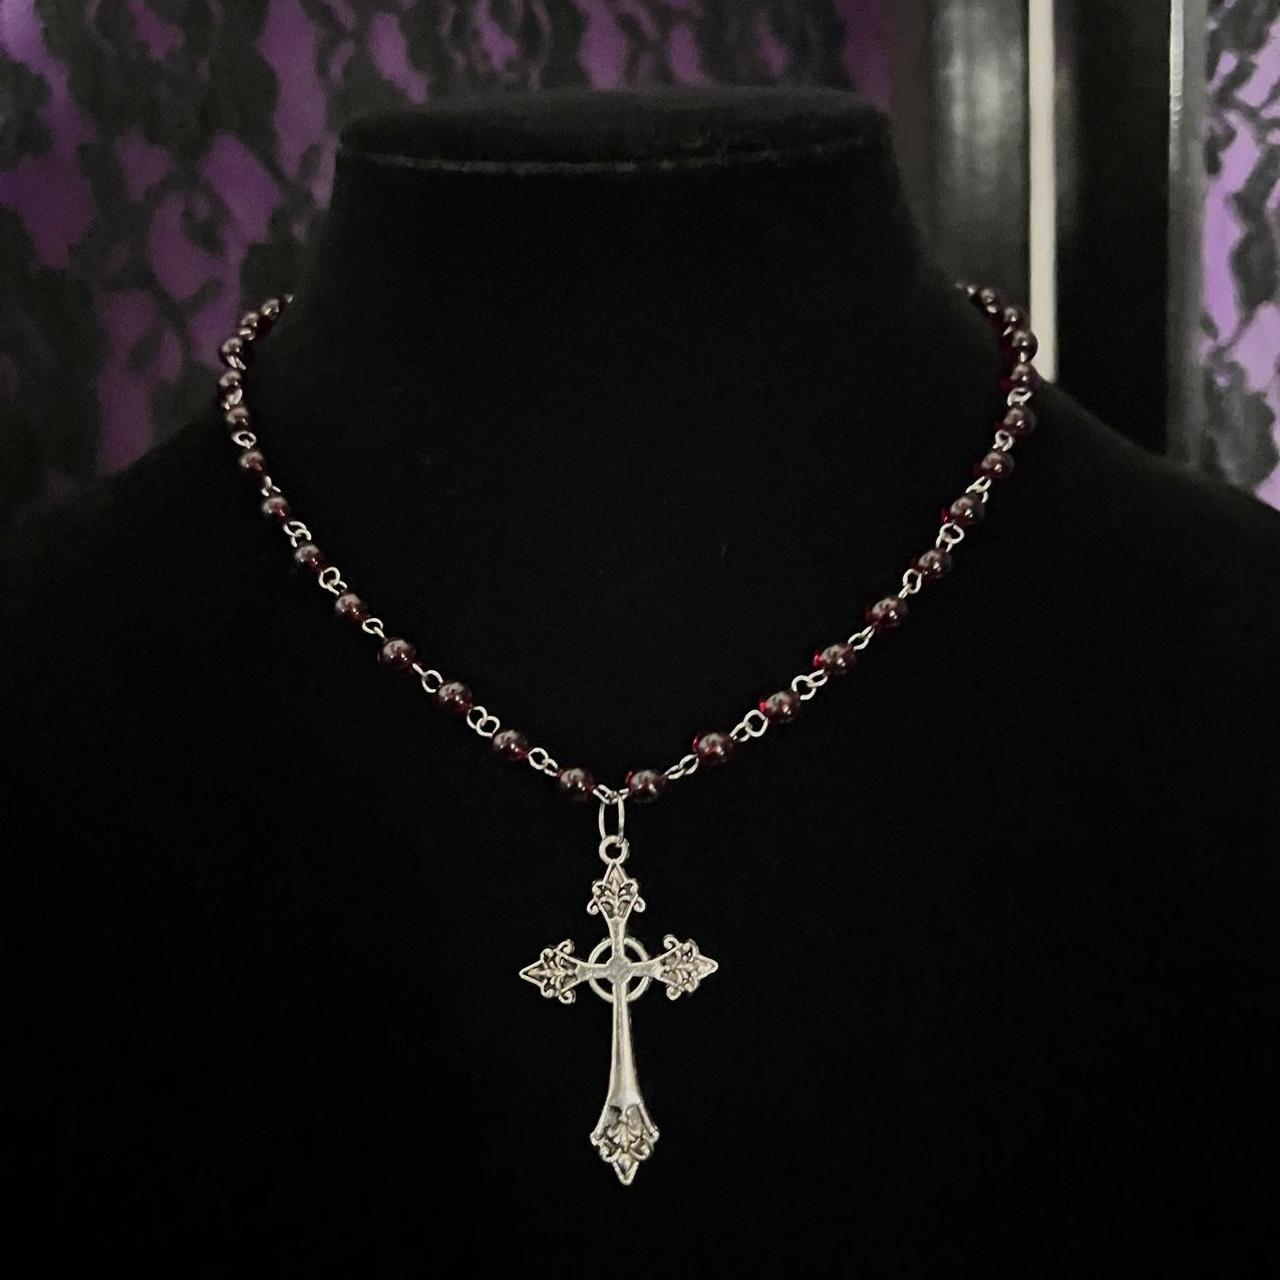 Women's Red and Silver Jewellery | Depop